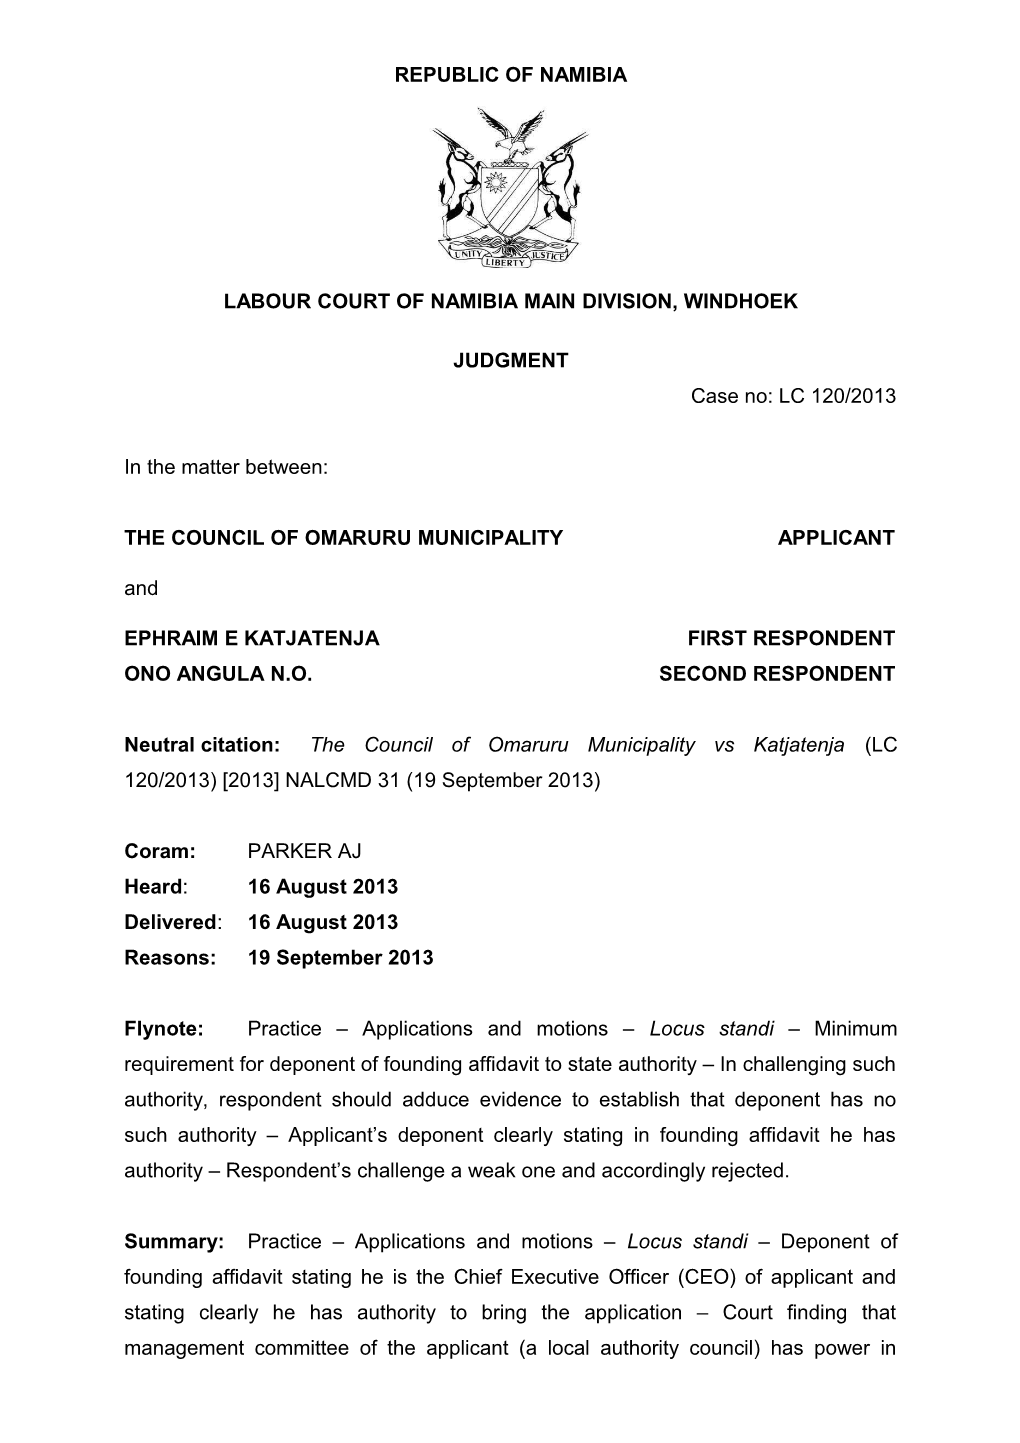 Labour Court of Namibia Main Division, Windhoek